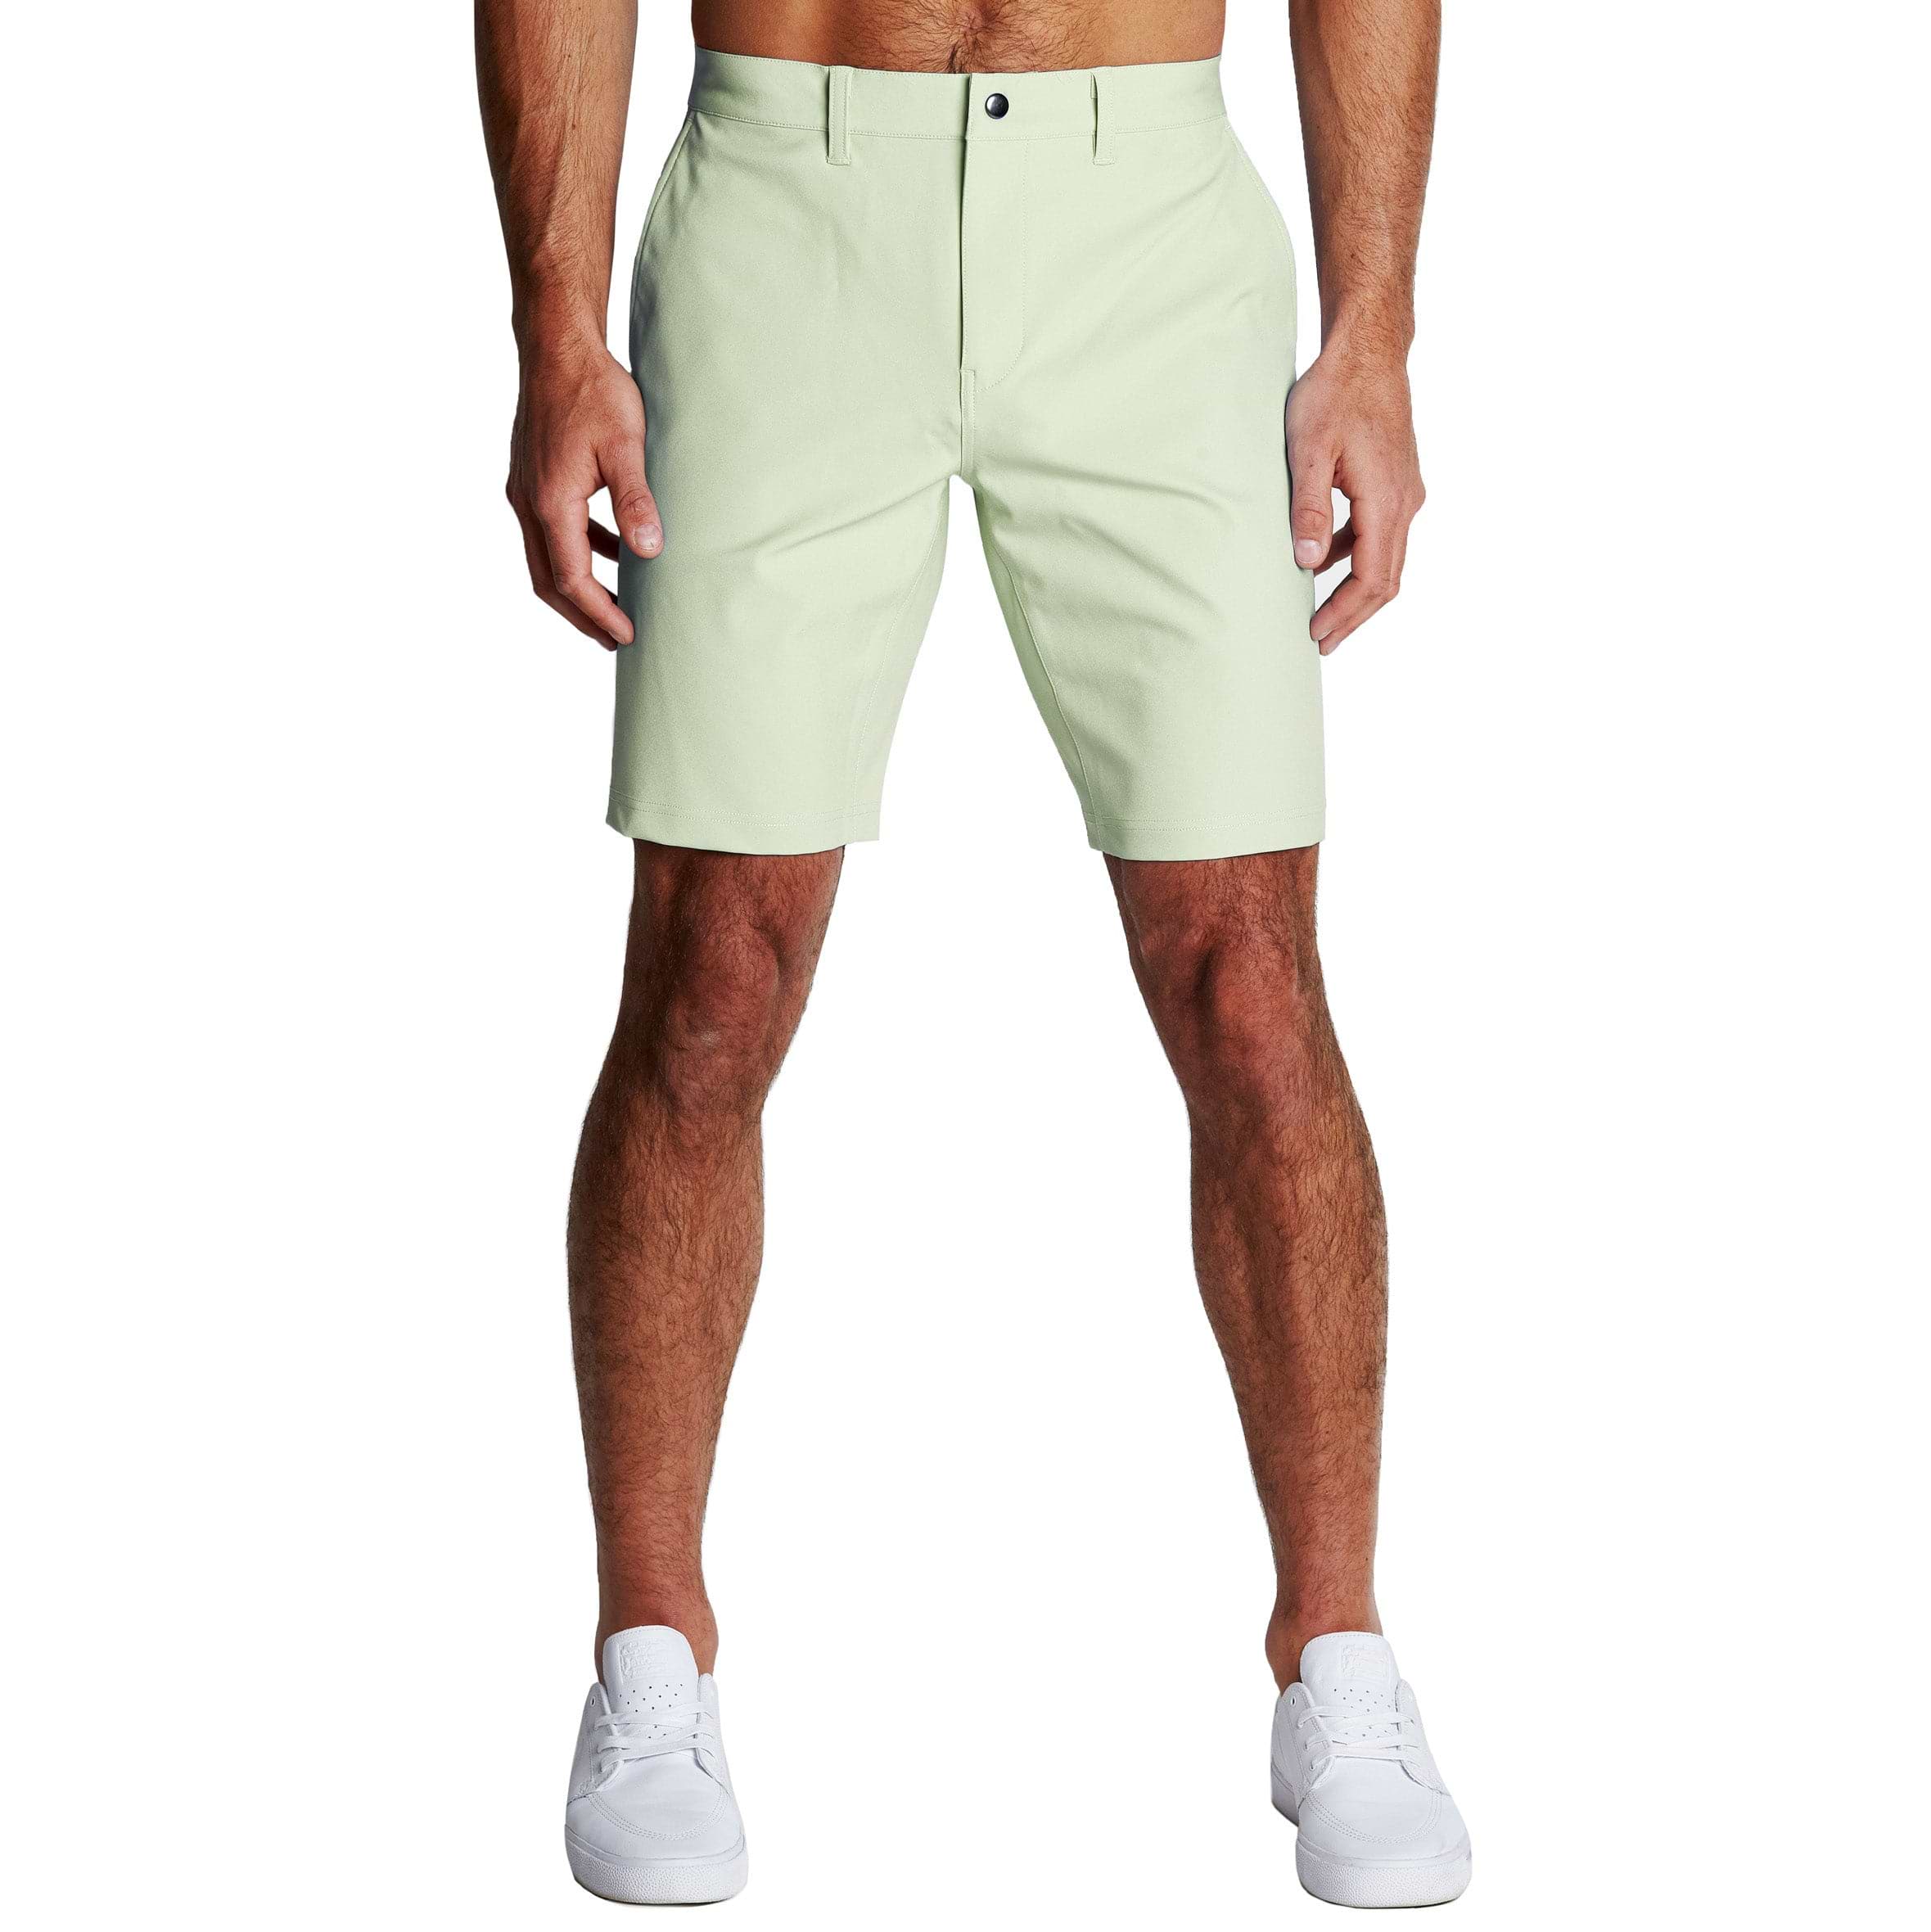 Athletic Fit Shorts - Mint Green